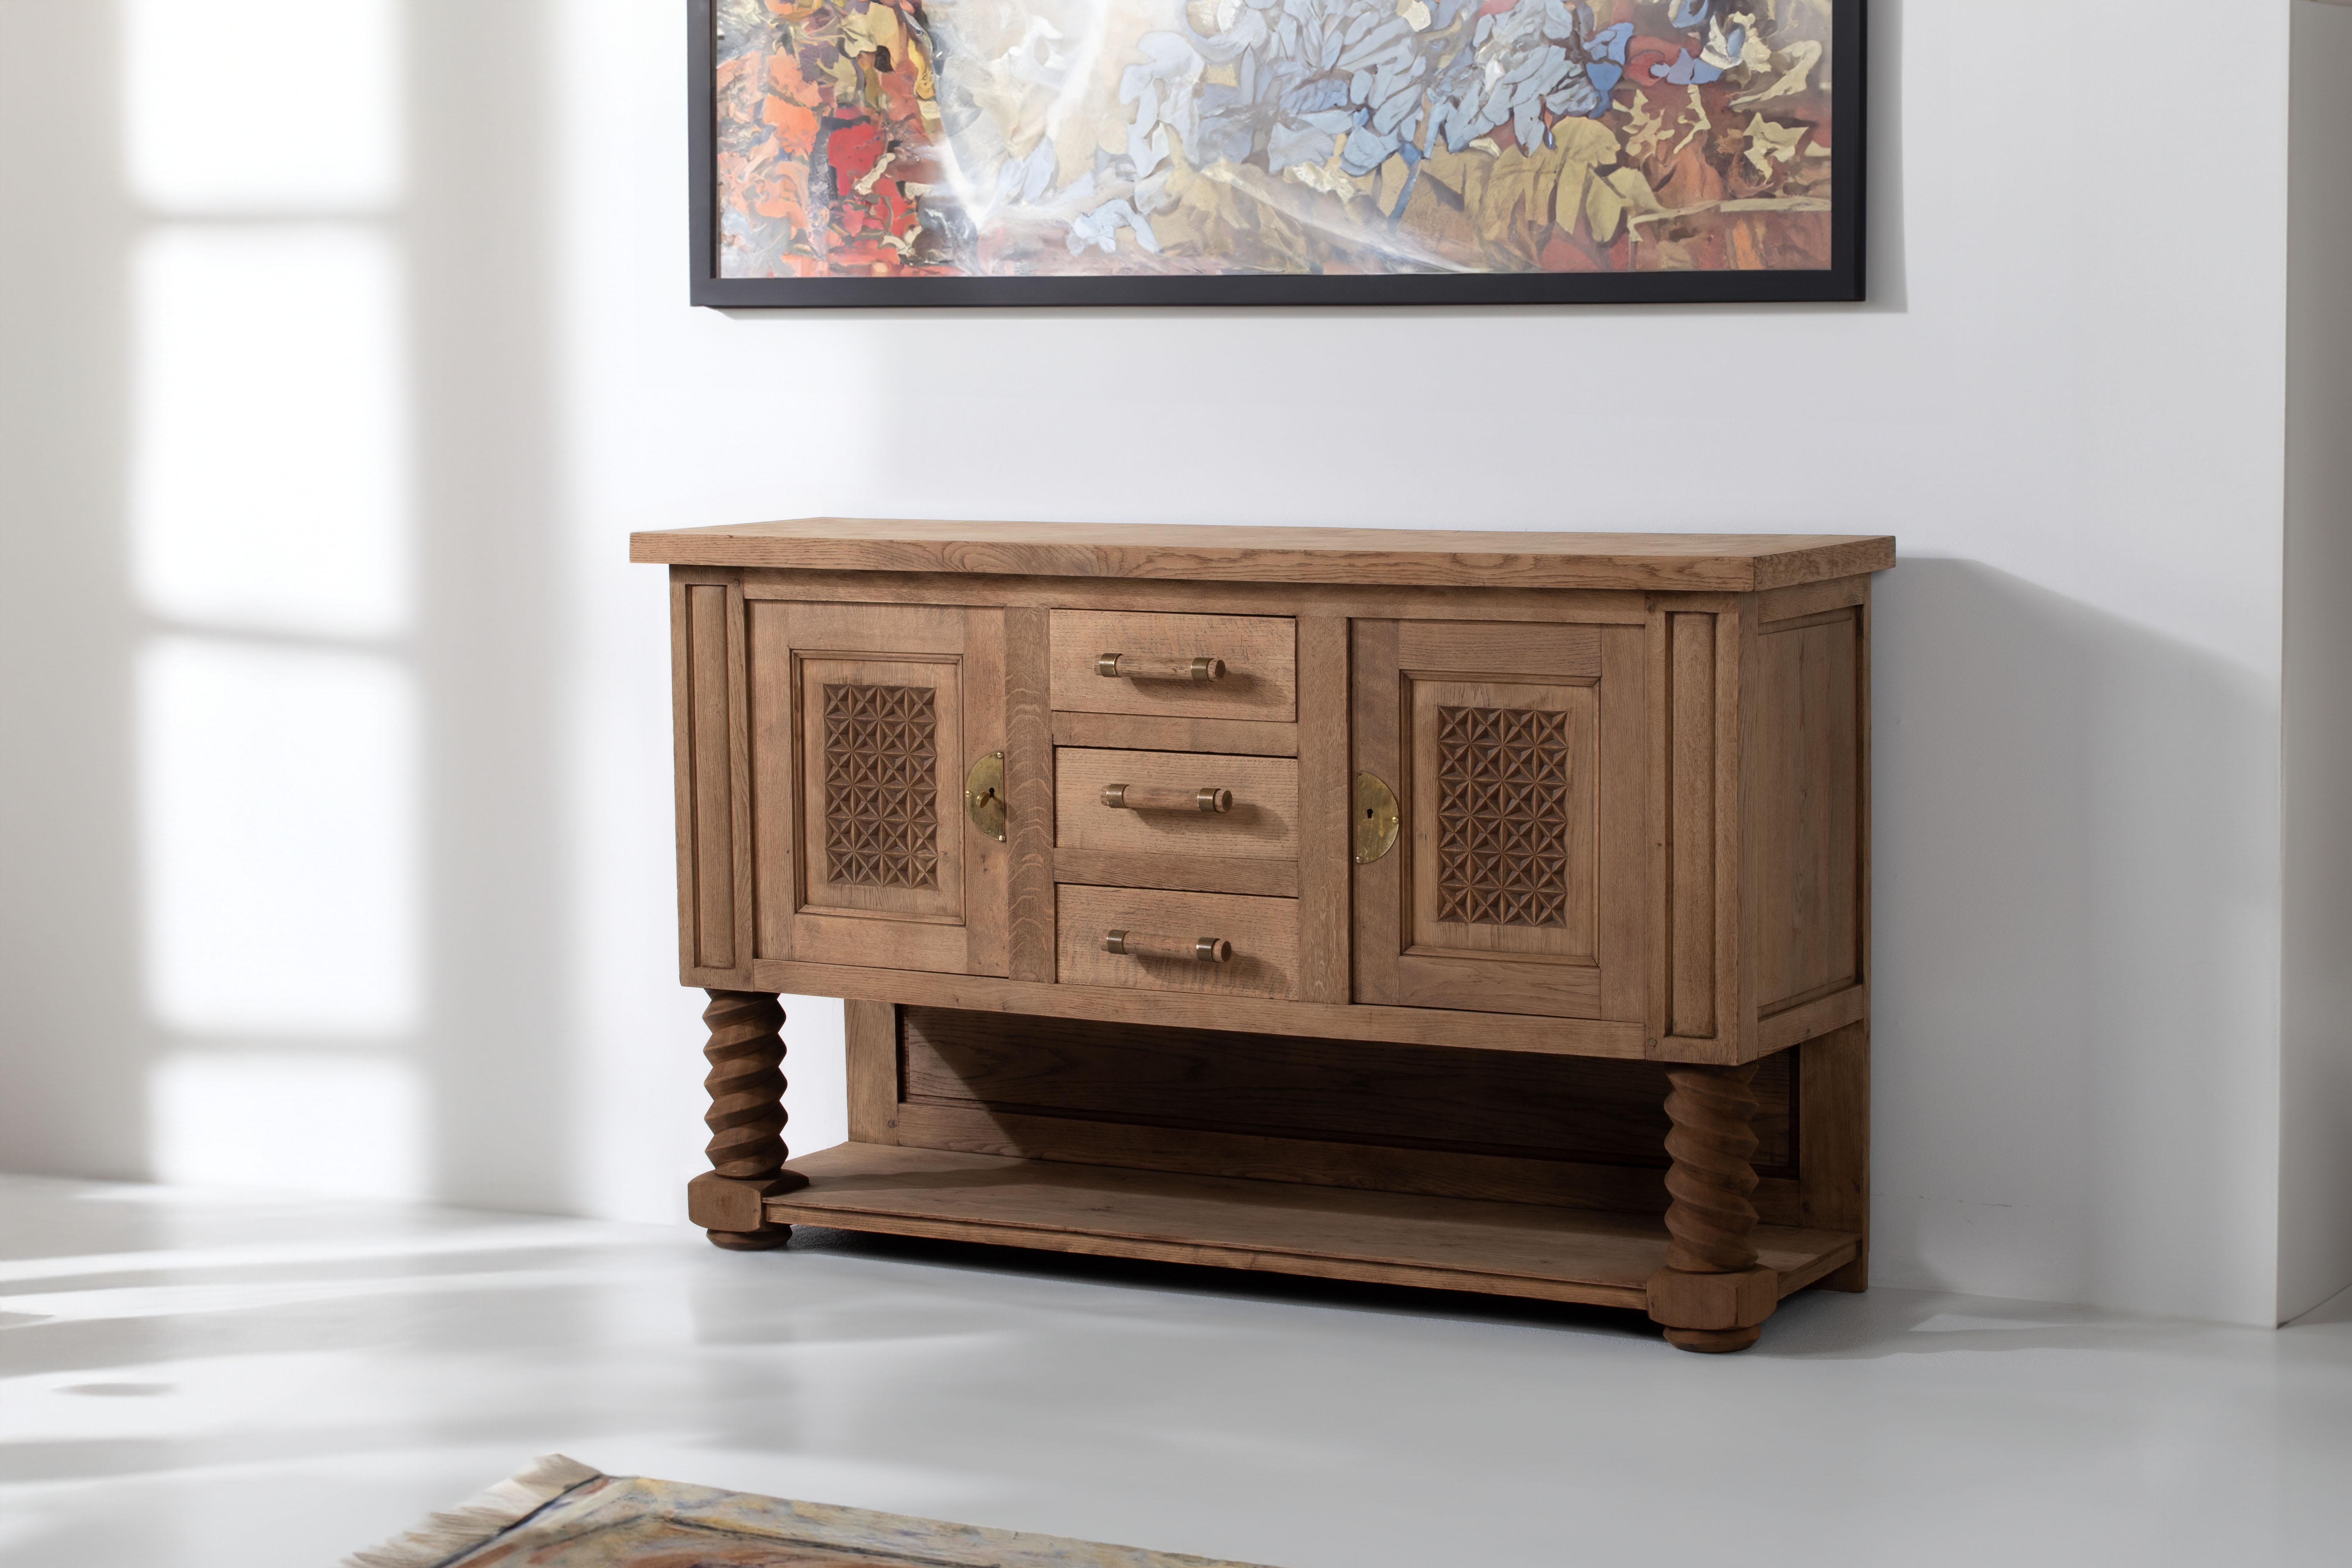 Introducing a Dudouyt-inspired French Oak Sideboard, a timeless piece exuding vintage charm. This exceptional sideboard stands on screw legs, with a low shelf enhancing its storage capabilities. Two spacious compartments offer ample storage, making